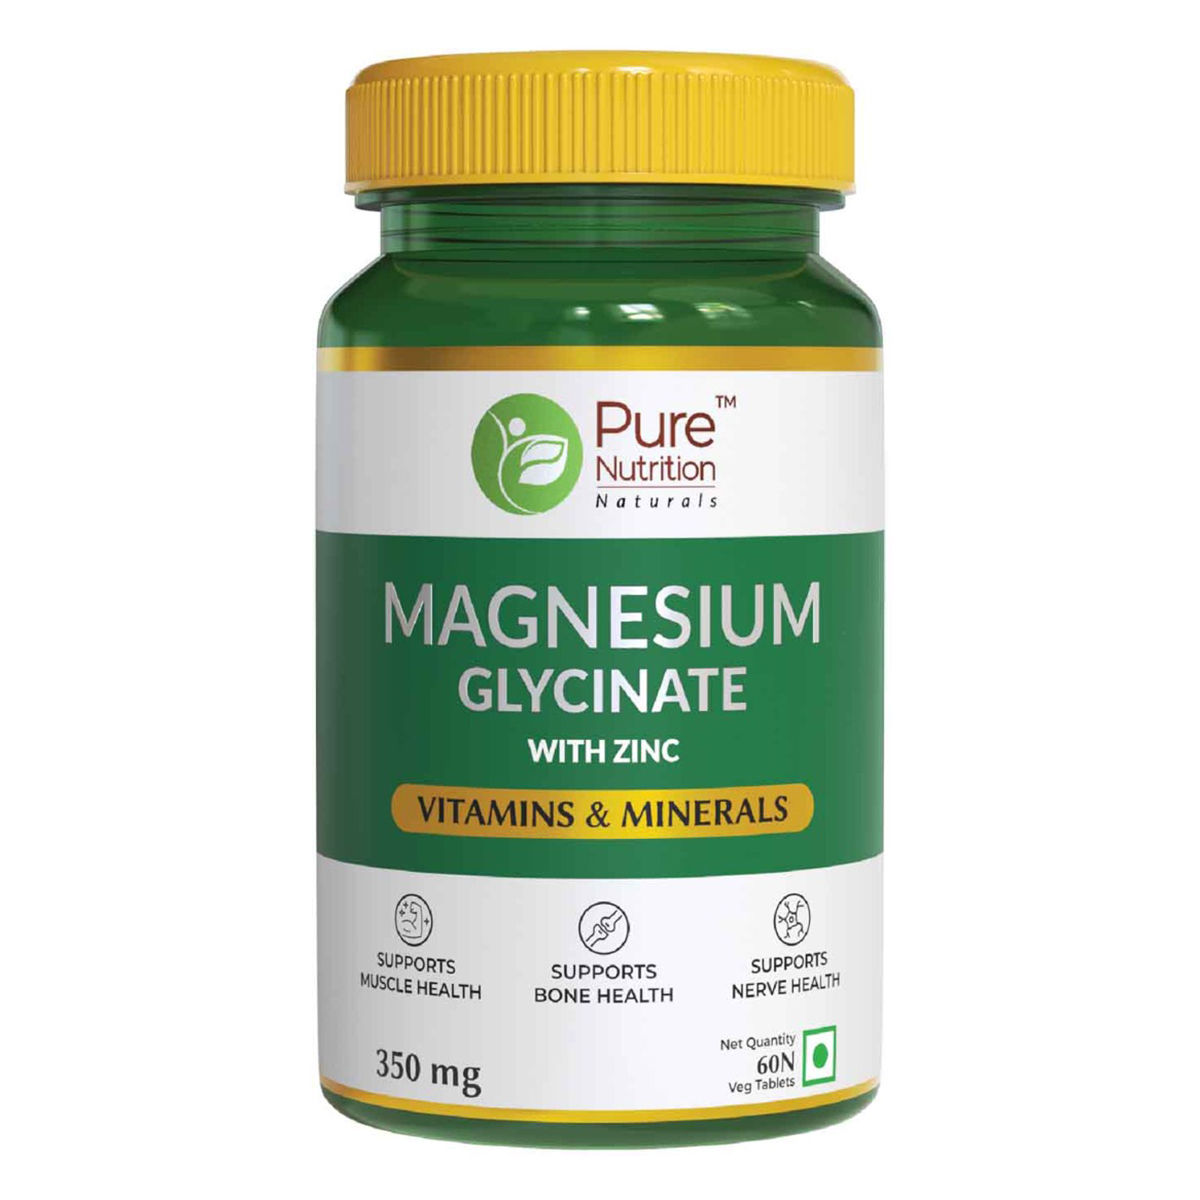 Buy Pure Nutrition Magnesium Glycinate with Zinc 350 mg, 60 Tablets Online